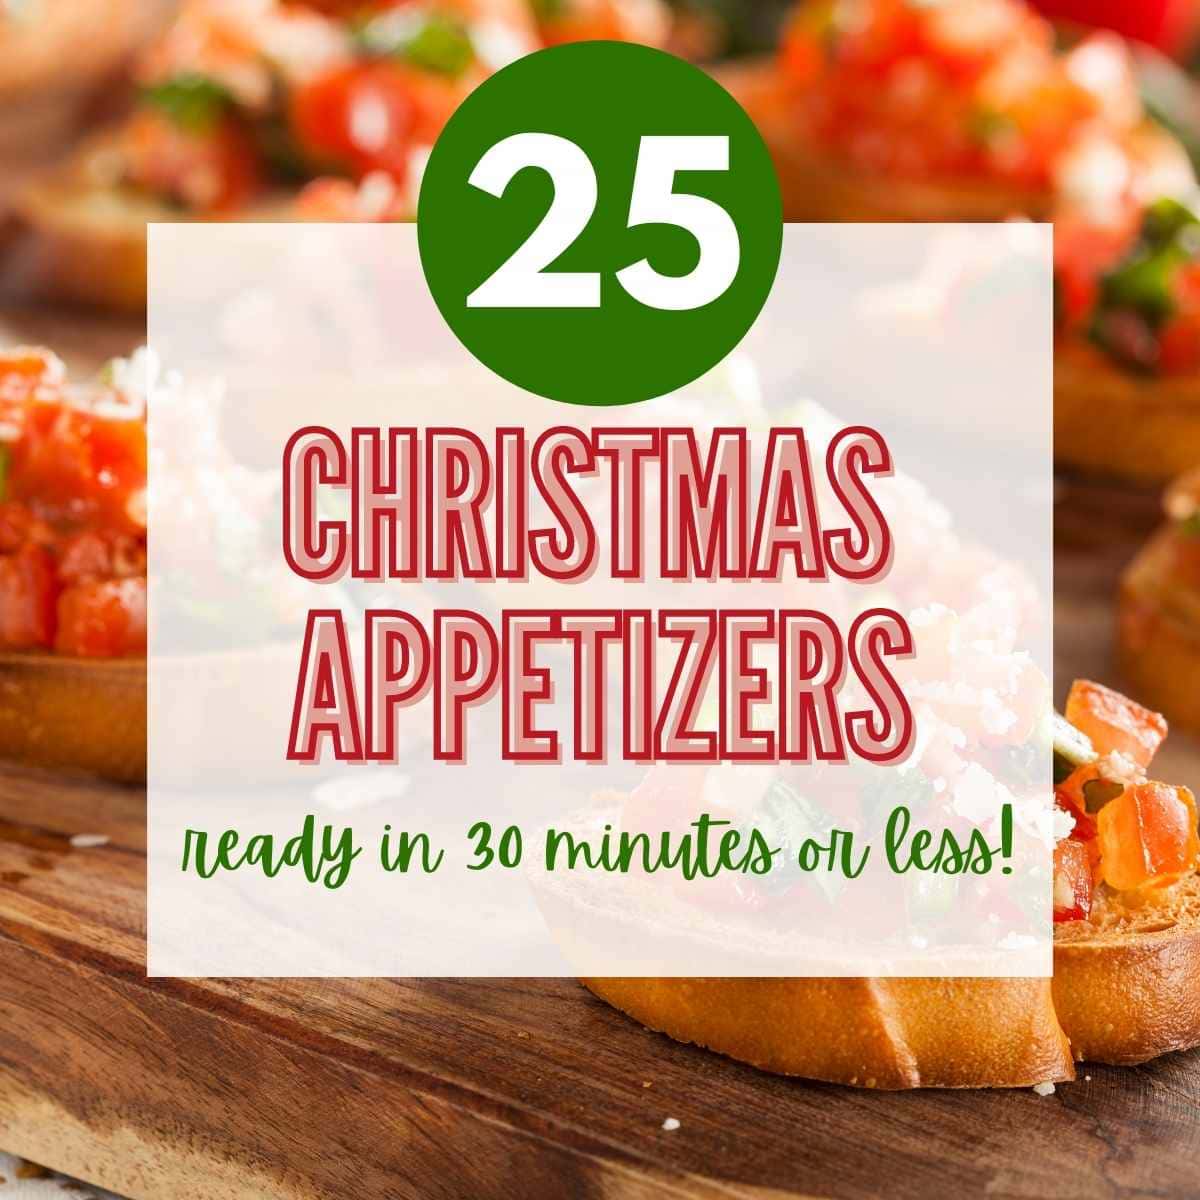 Christmas appetizer graphic with text overlay.